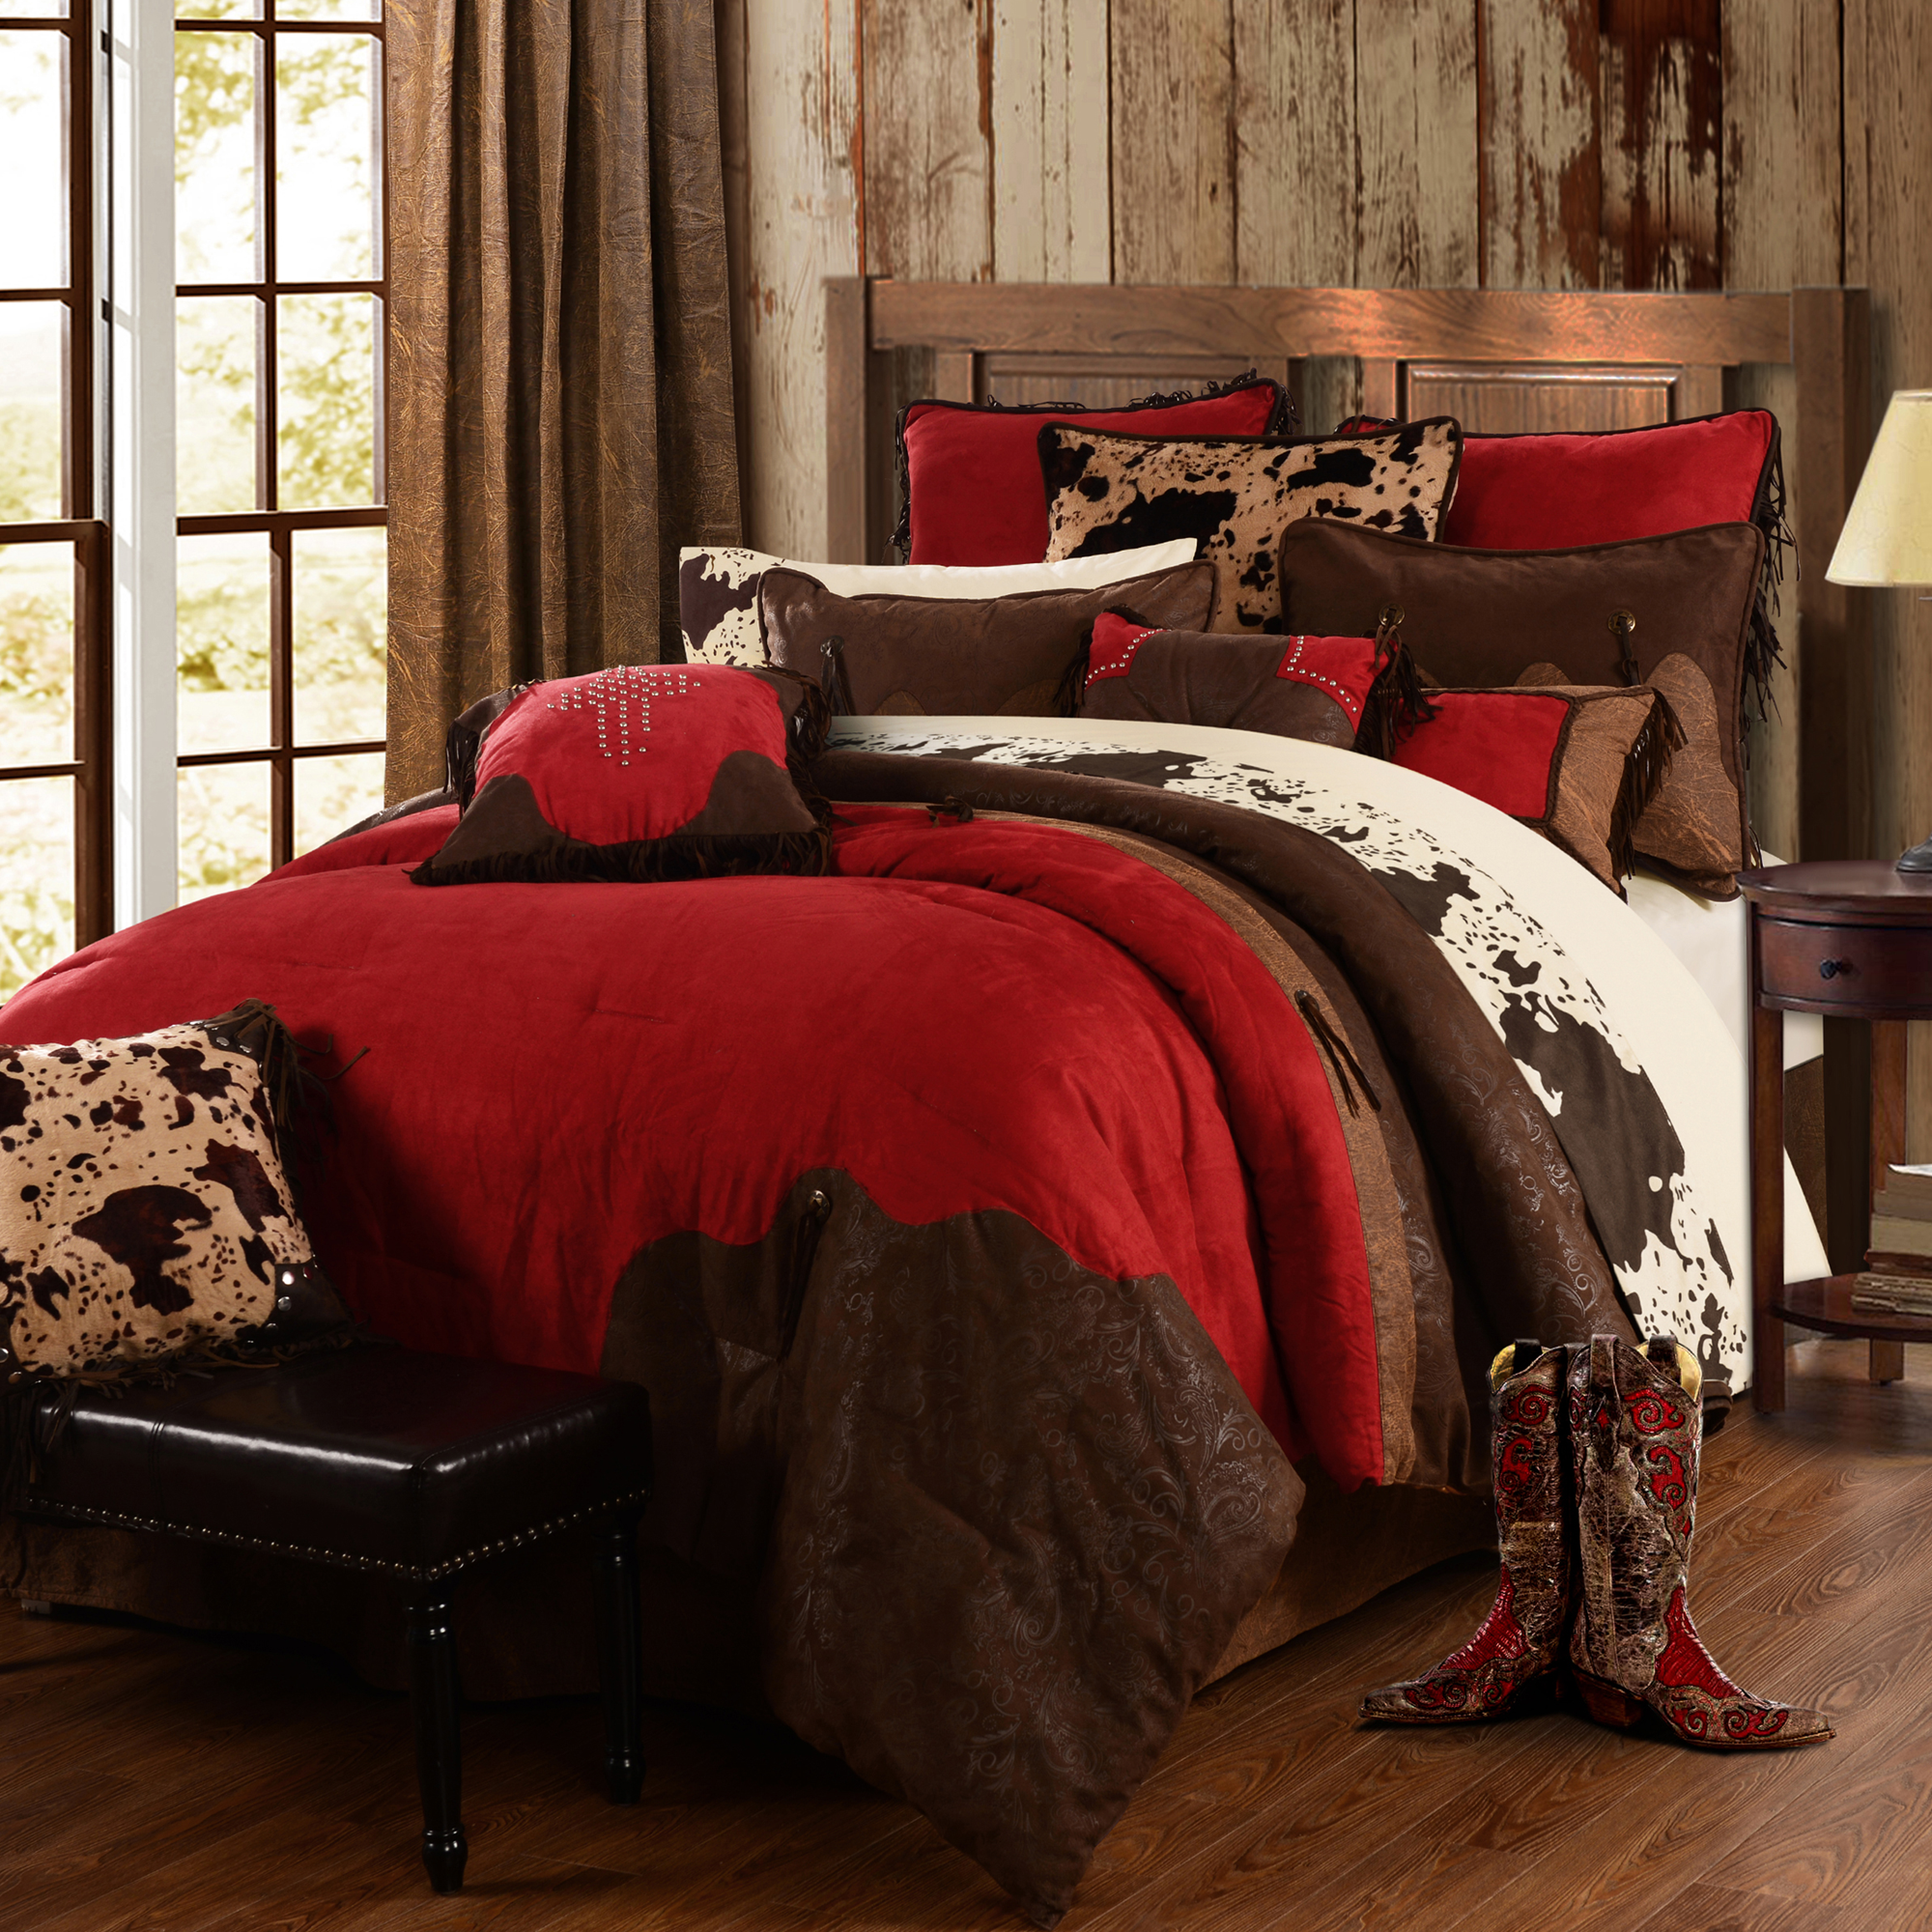 Ws4005 Red Rodeo Bedding Set Western Bedding By Hiend Accents